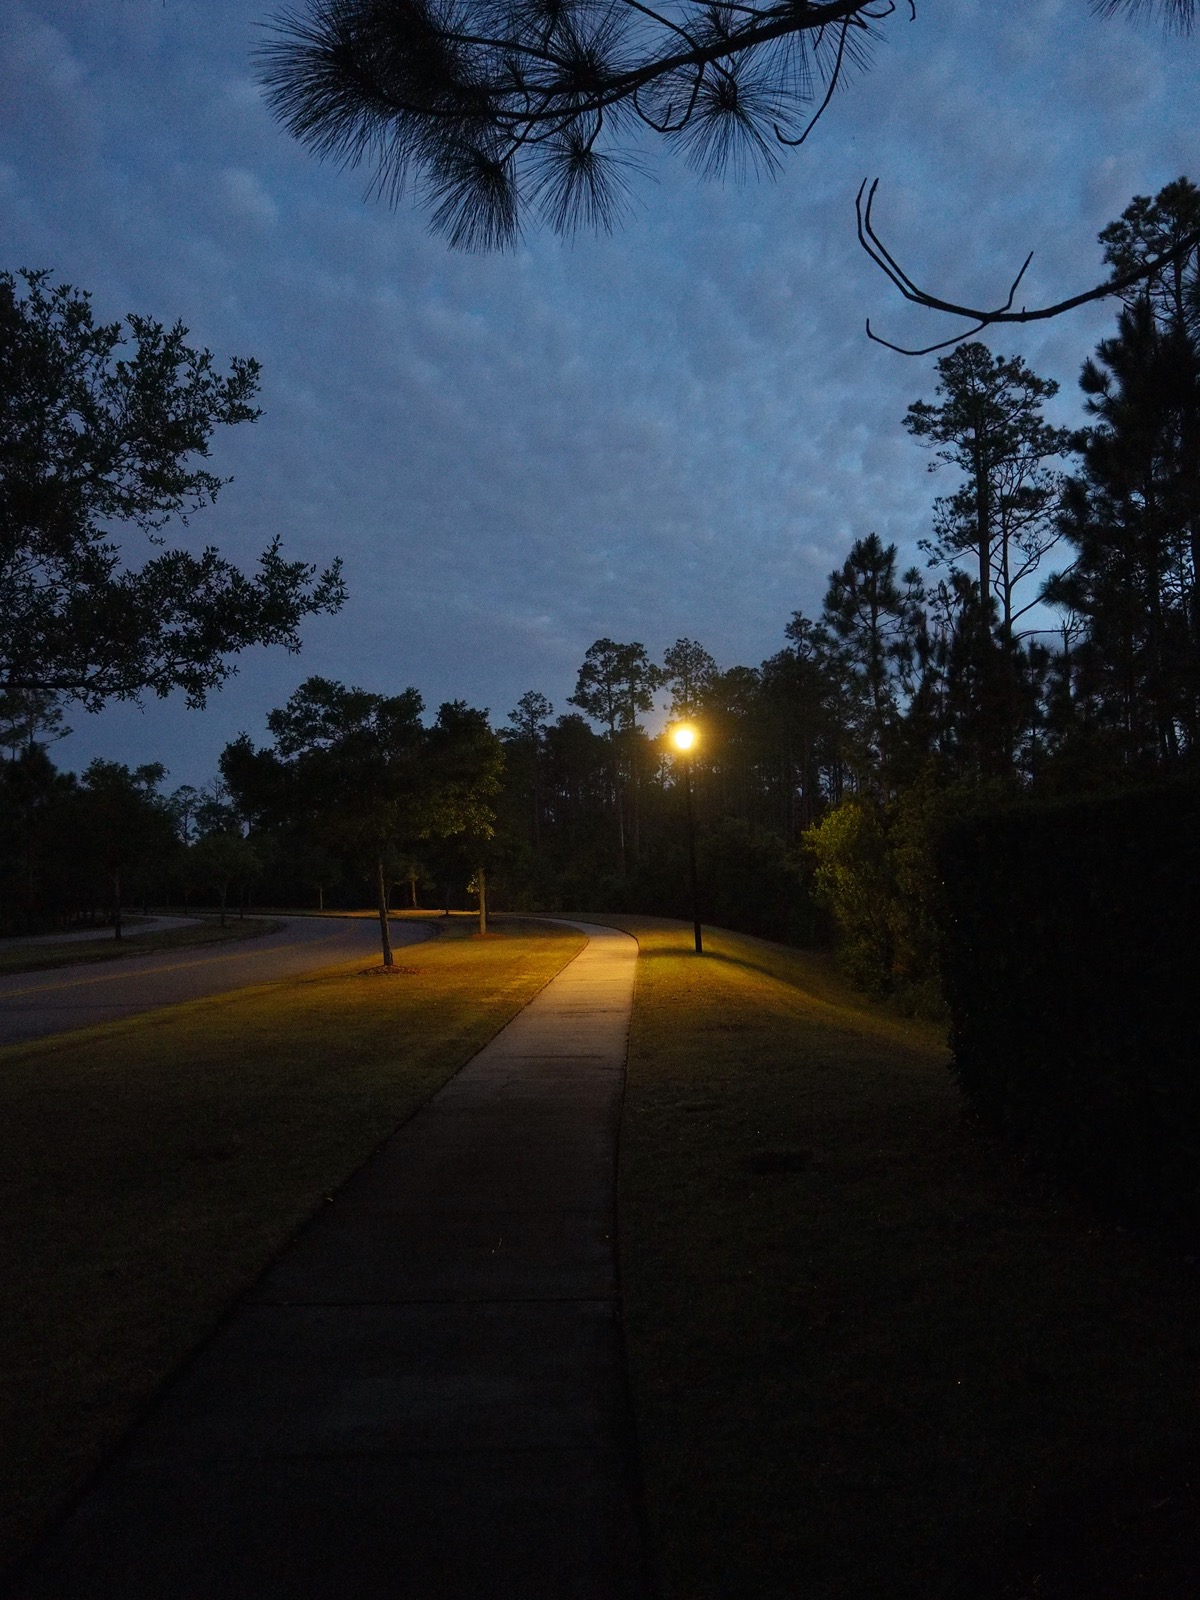 Photo of a street lamp above a sidewalk in a suburban landscape in the early morning twilight